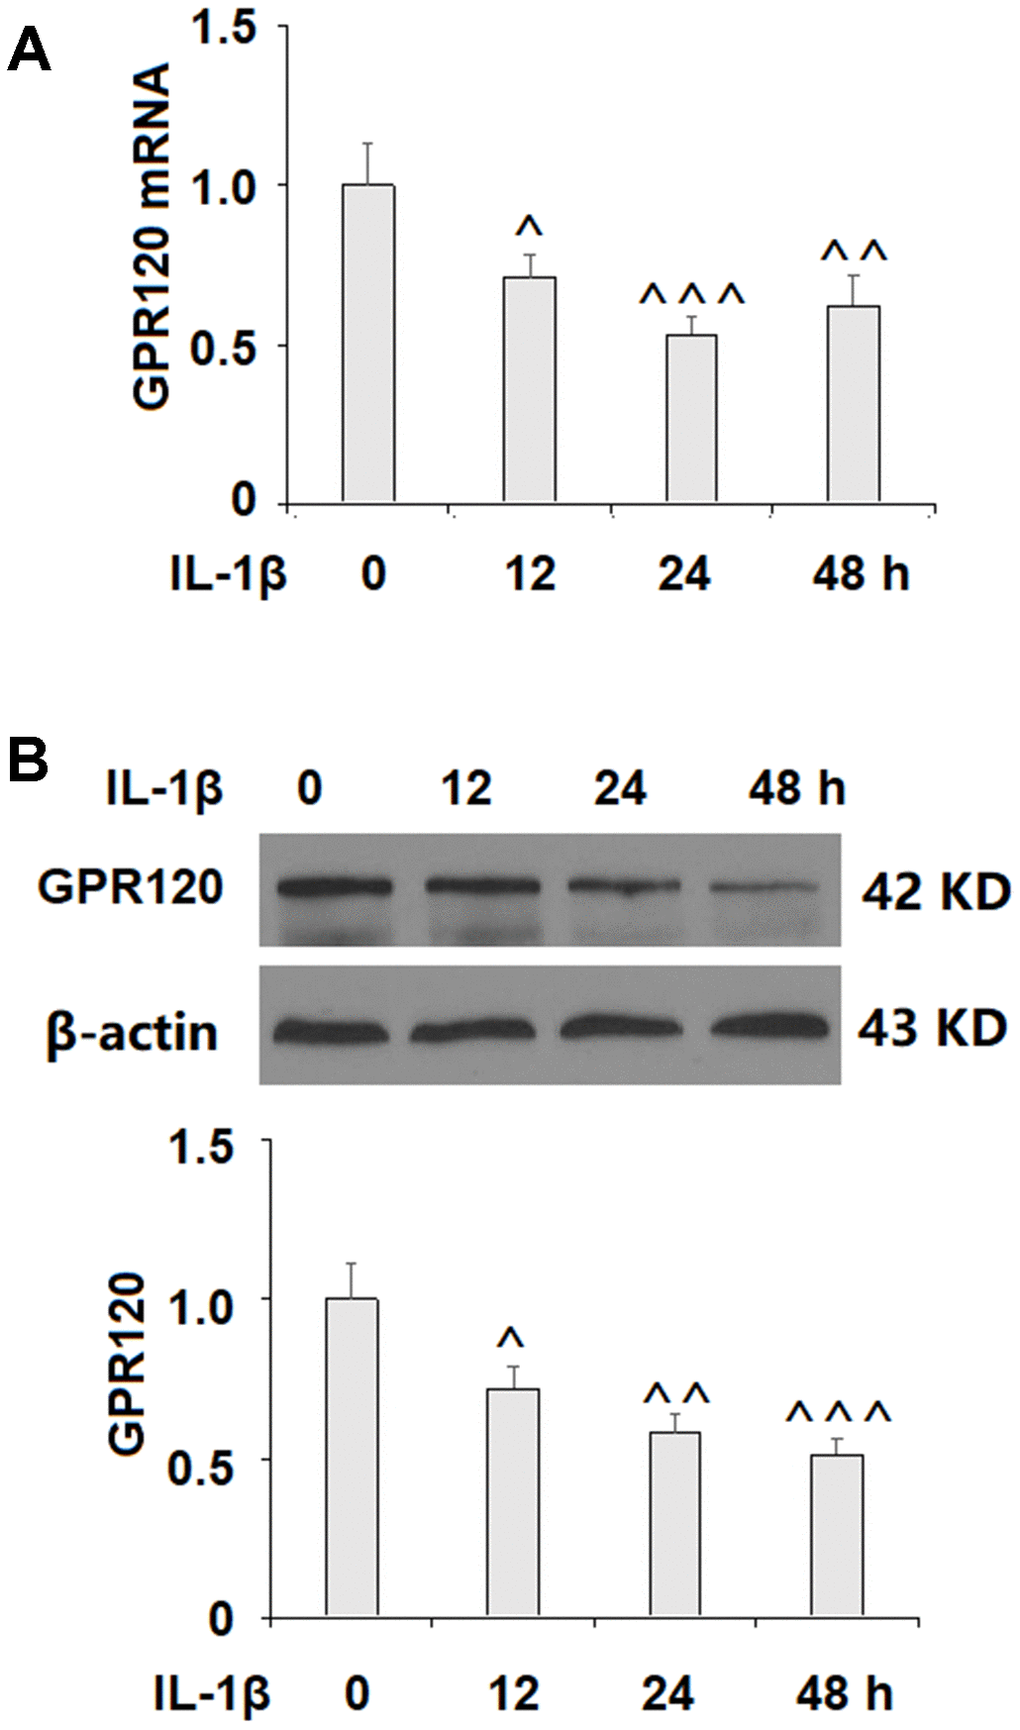 IL-1β reduced the expression of GPR120 in ATDC5 chondrocytes. Cells were treated with IL-1β (10 ng/ml) for 12, 24, and 48 h. (A) mRNA expression of GPR120; (B) Protein expression of GPR120 (^, ^^, ^^^, P